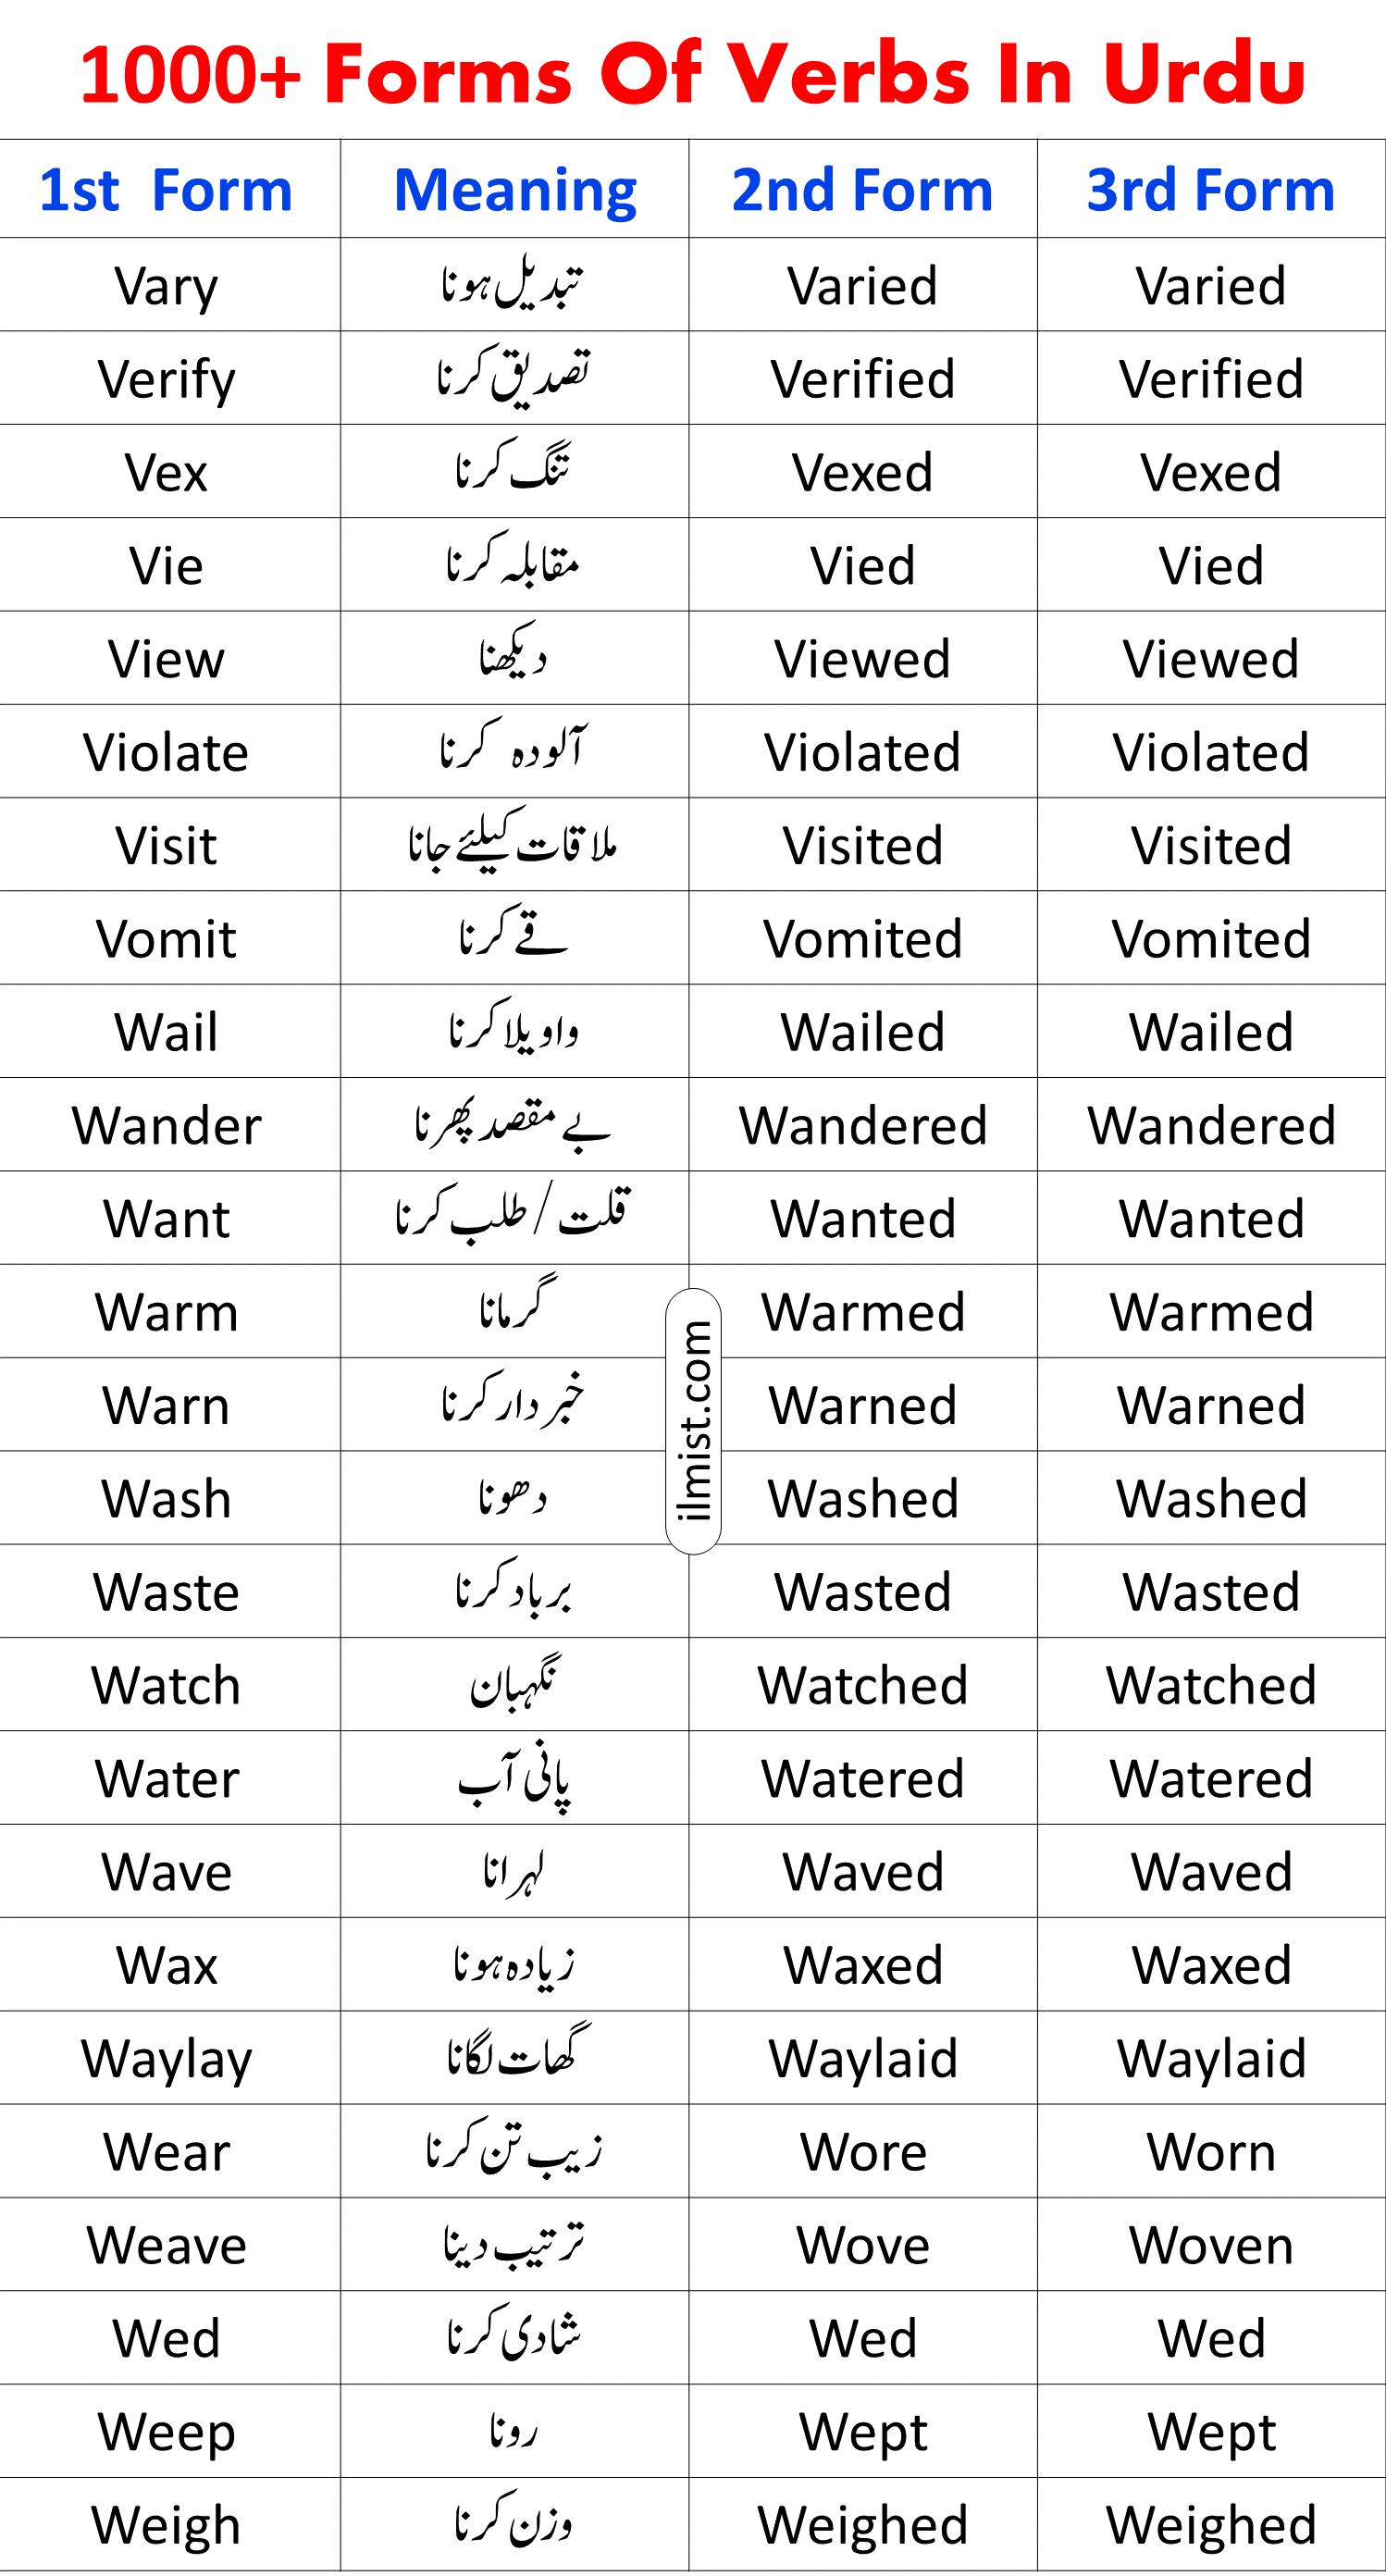 1000+ Forms Of Verbs In English With Urdu Meanings | 1st, 2nd, 3rd Forms